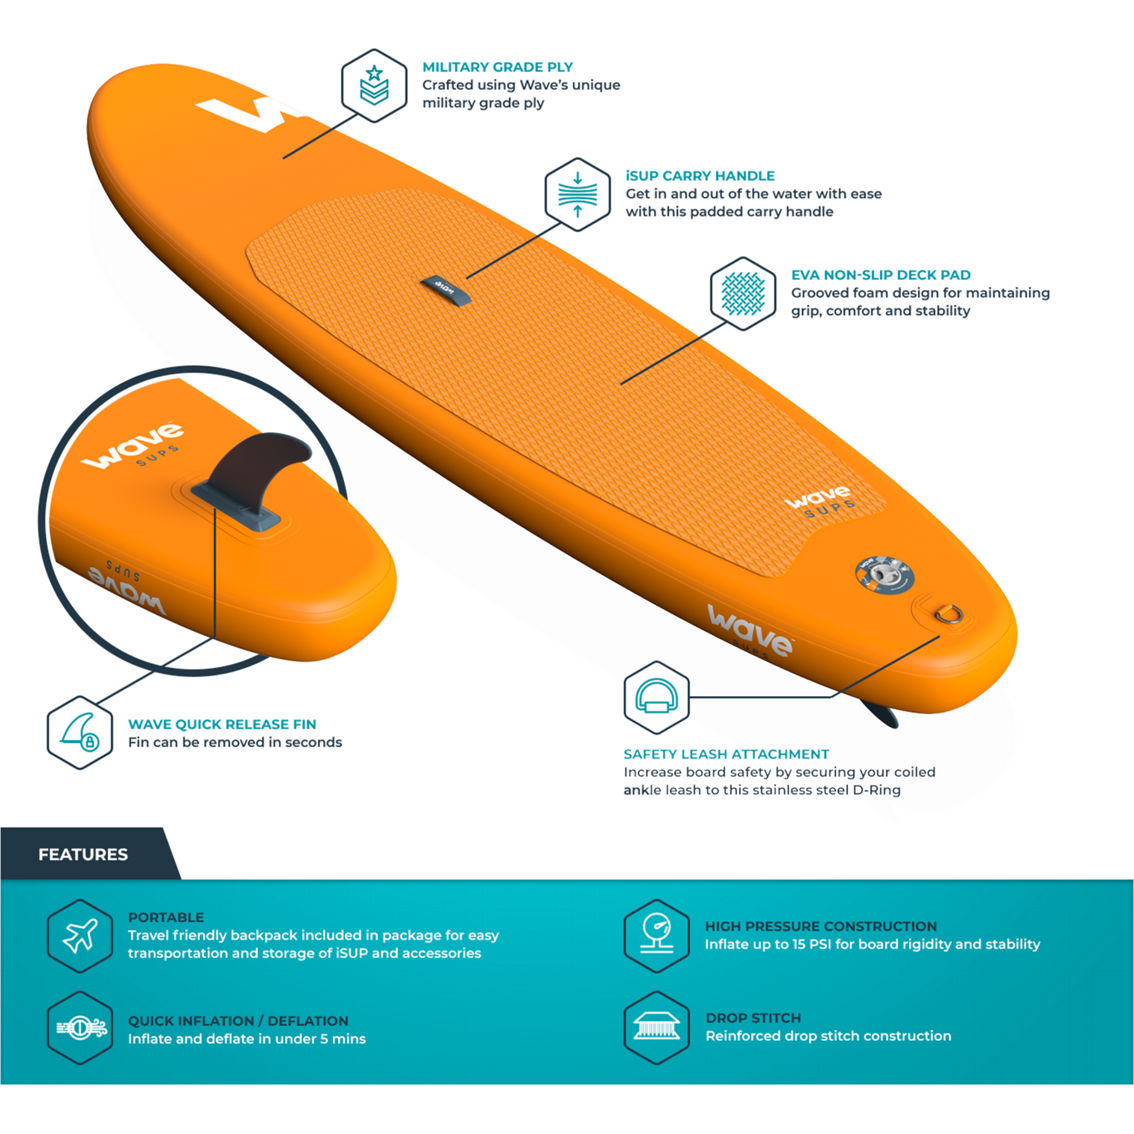 WAVE Direct 11 ft. Wave Cruiser Sup Package - Image 2 of 4